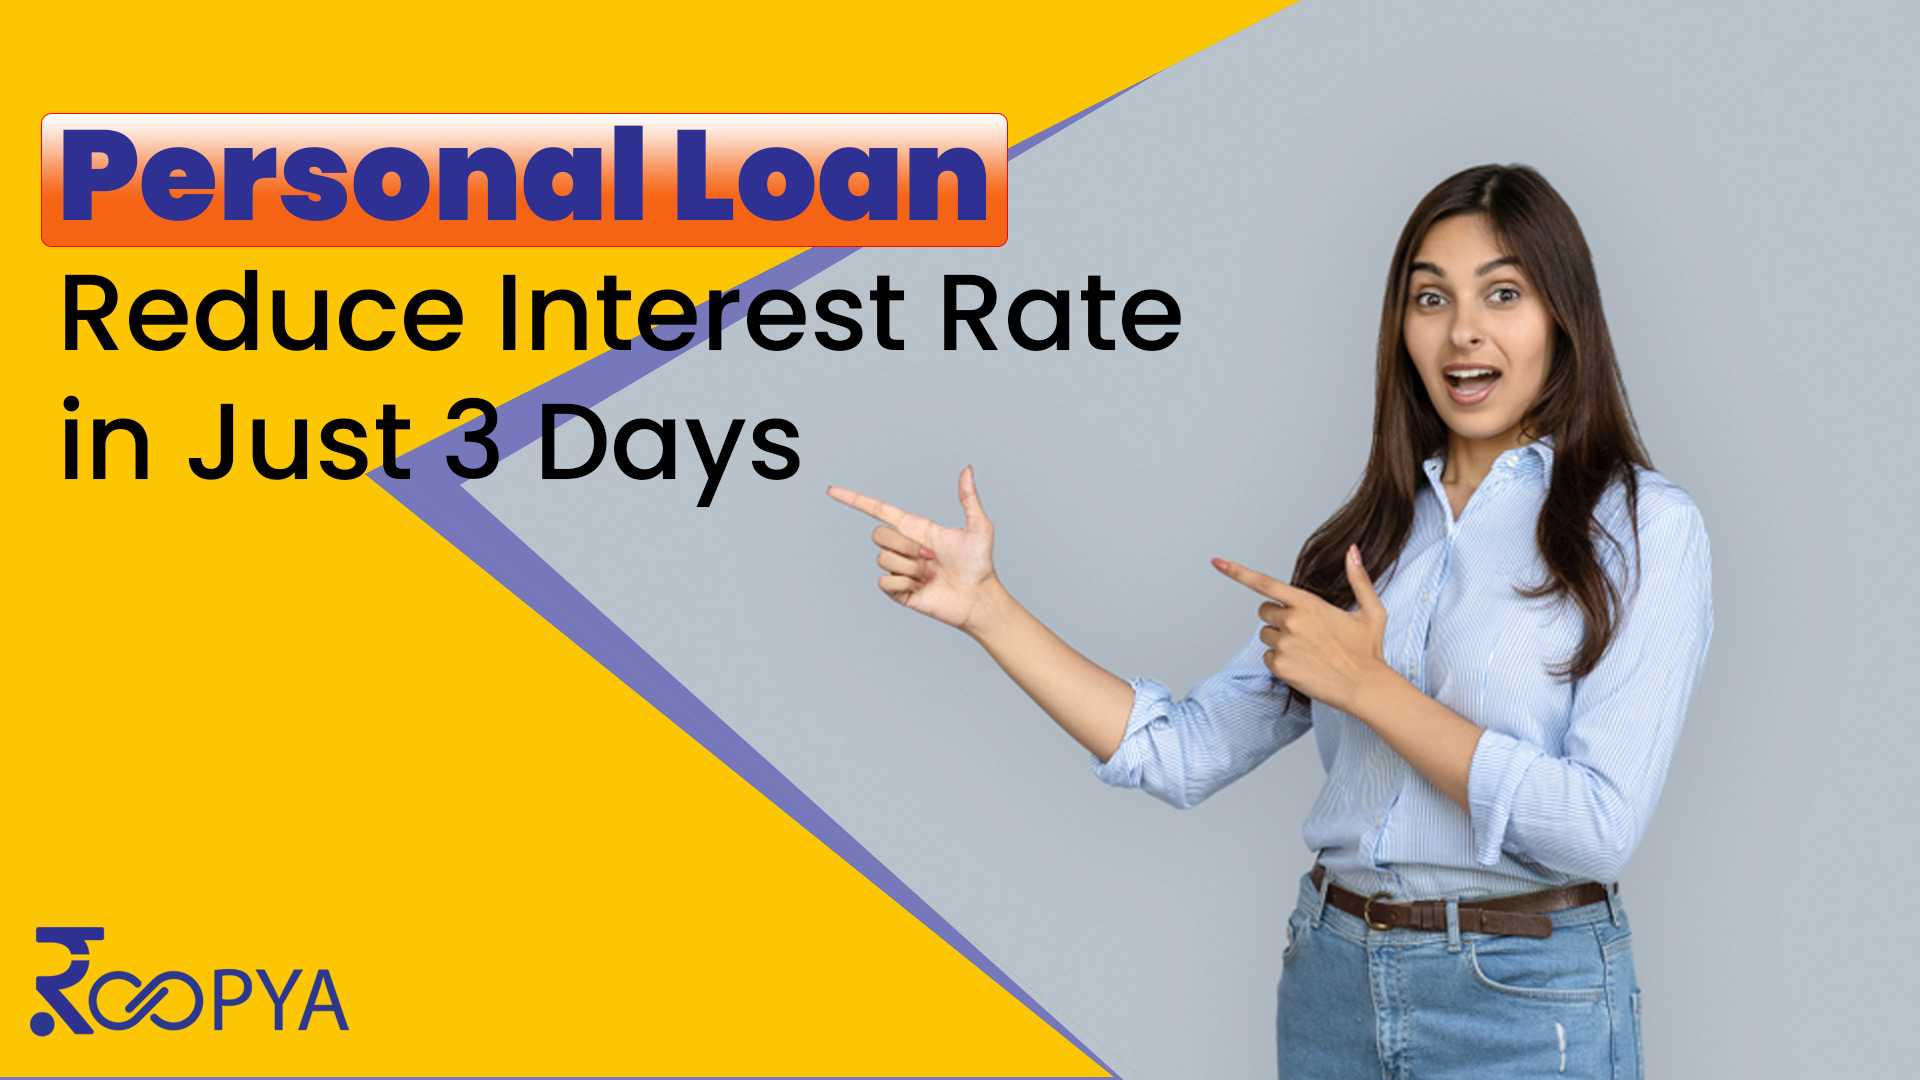 Personal loan interest rate